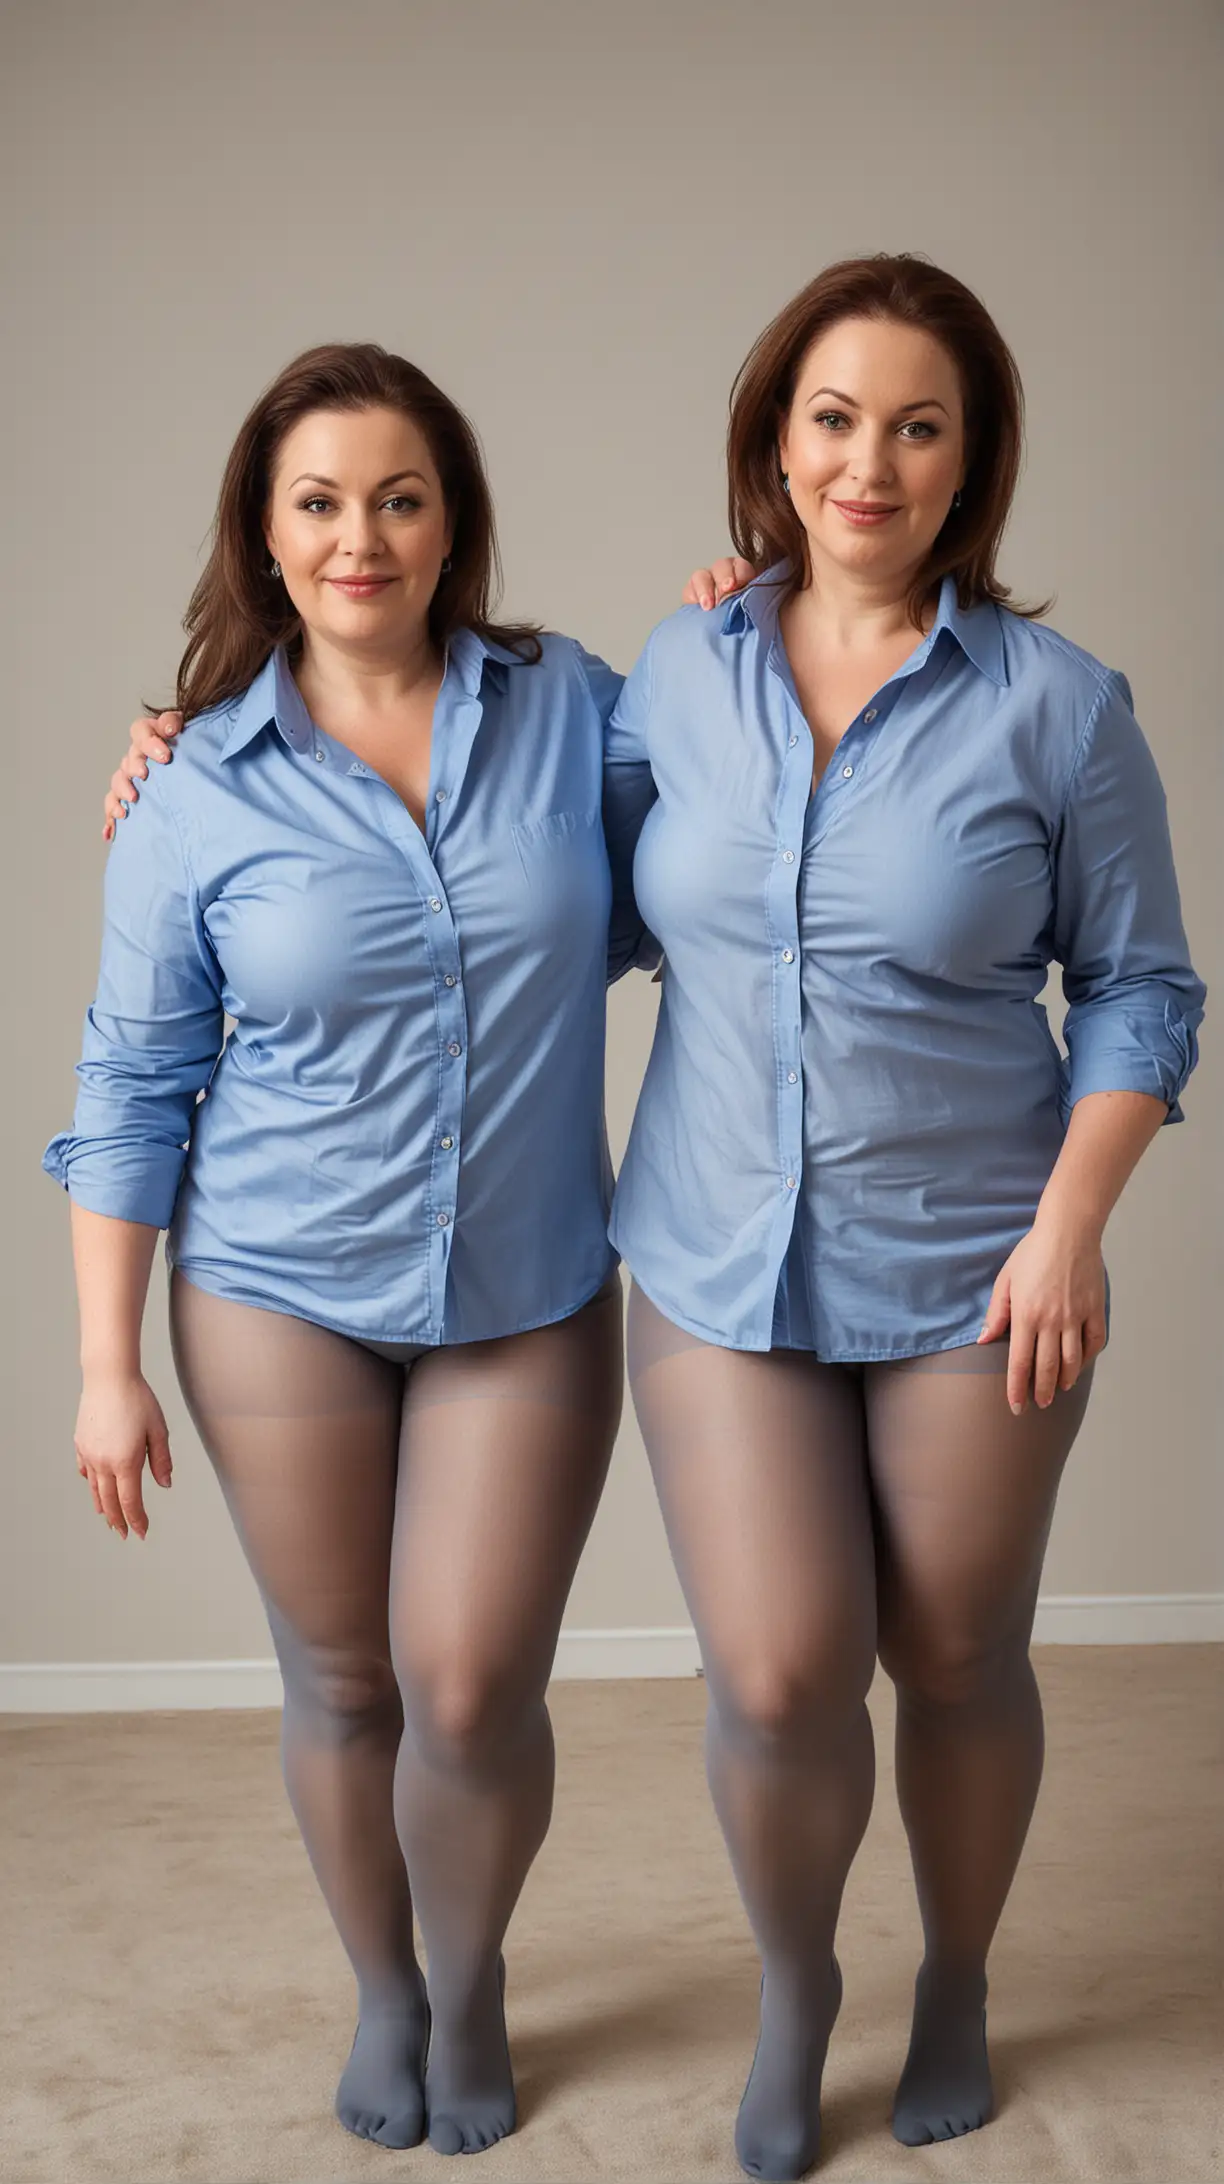 Playful Exercise Squats Mature Curvy Sisters in Blue Shirts and Gray Pantyhose